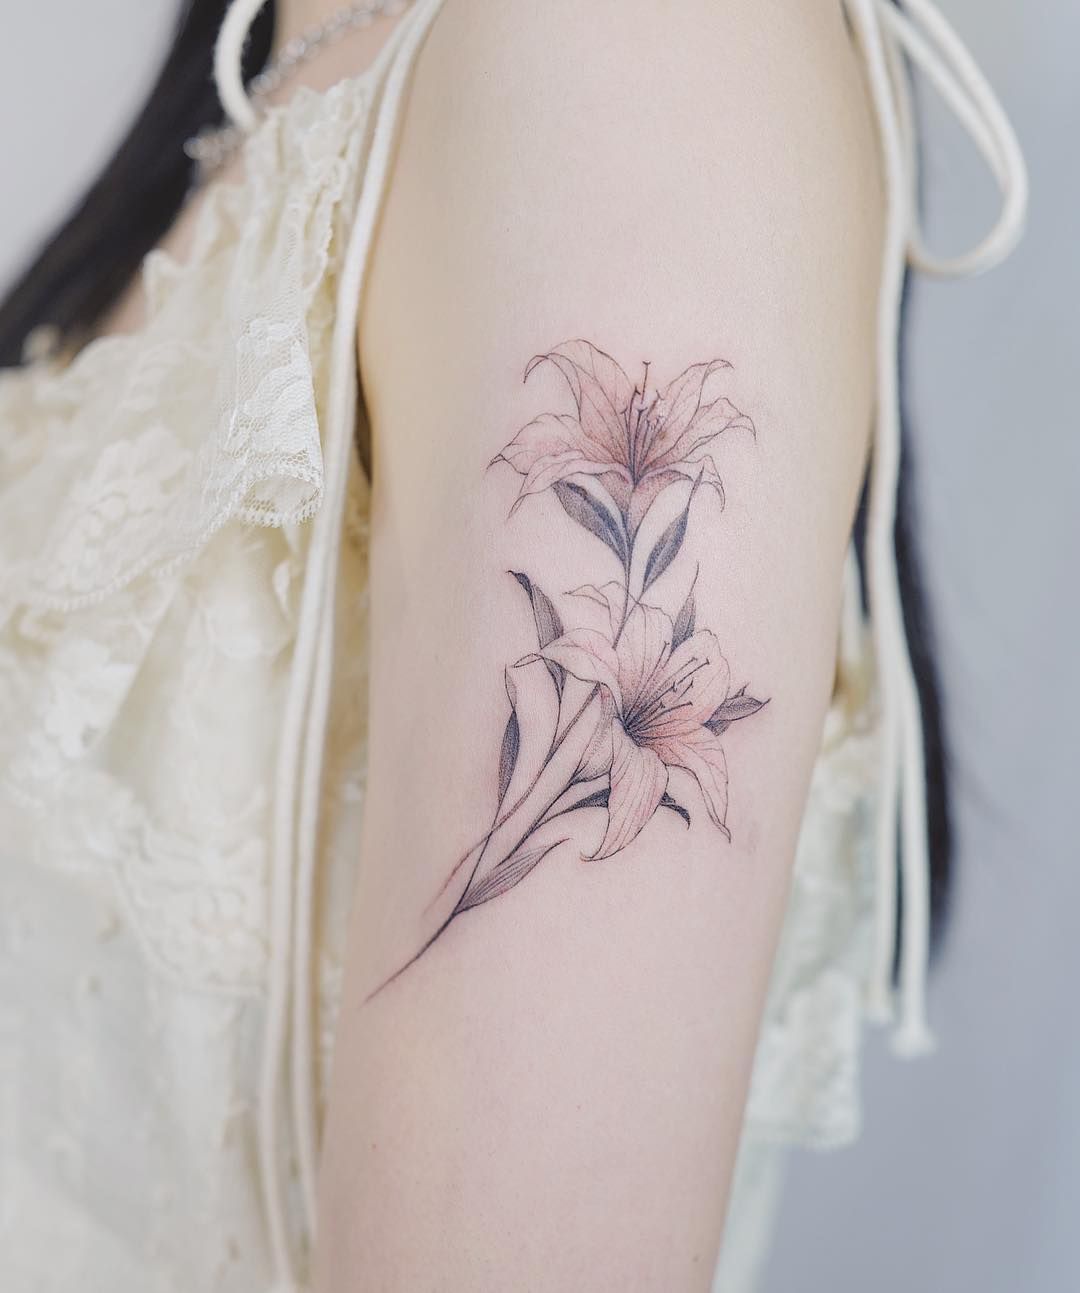 Lily Shoulder Tattoos Meaning Ideas Designs (36)